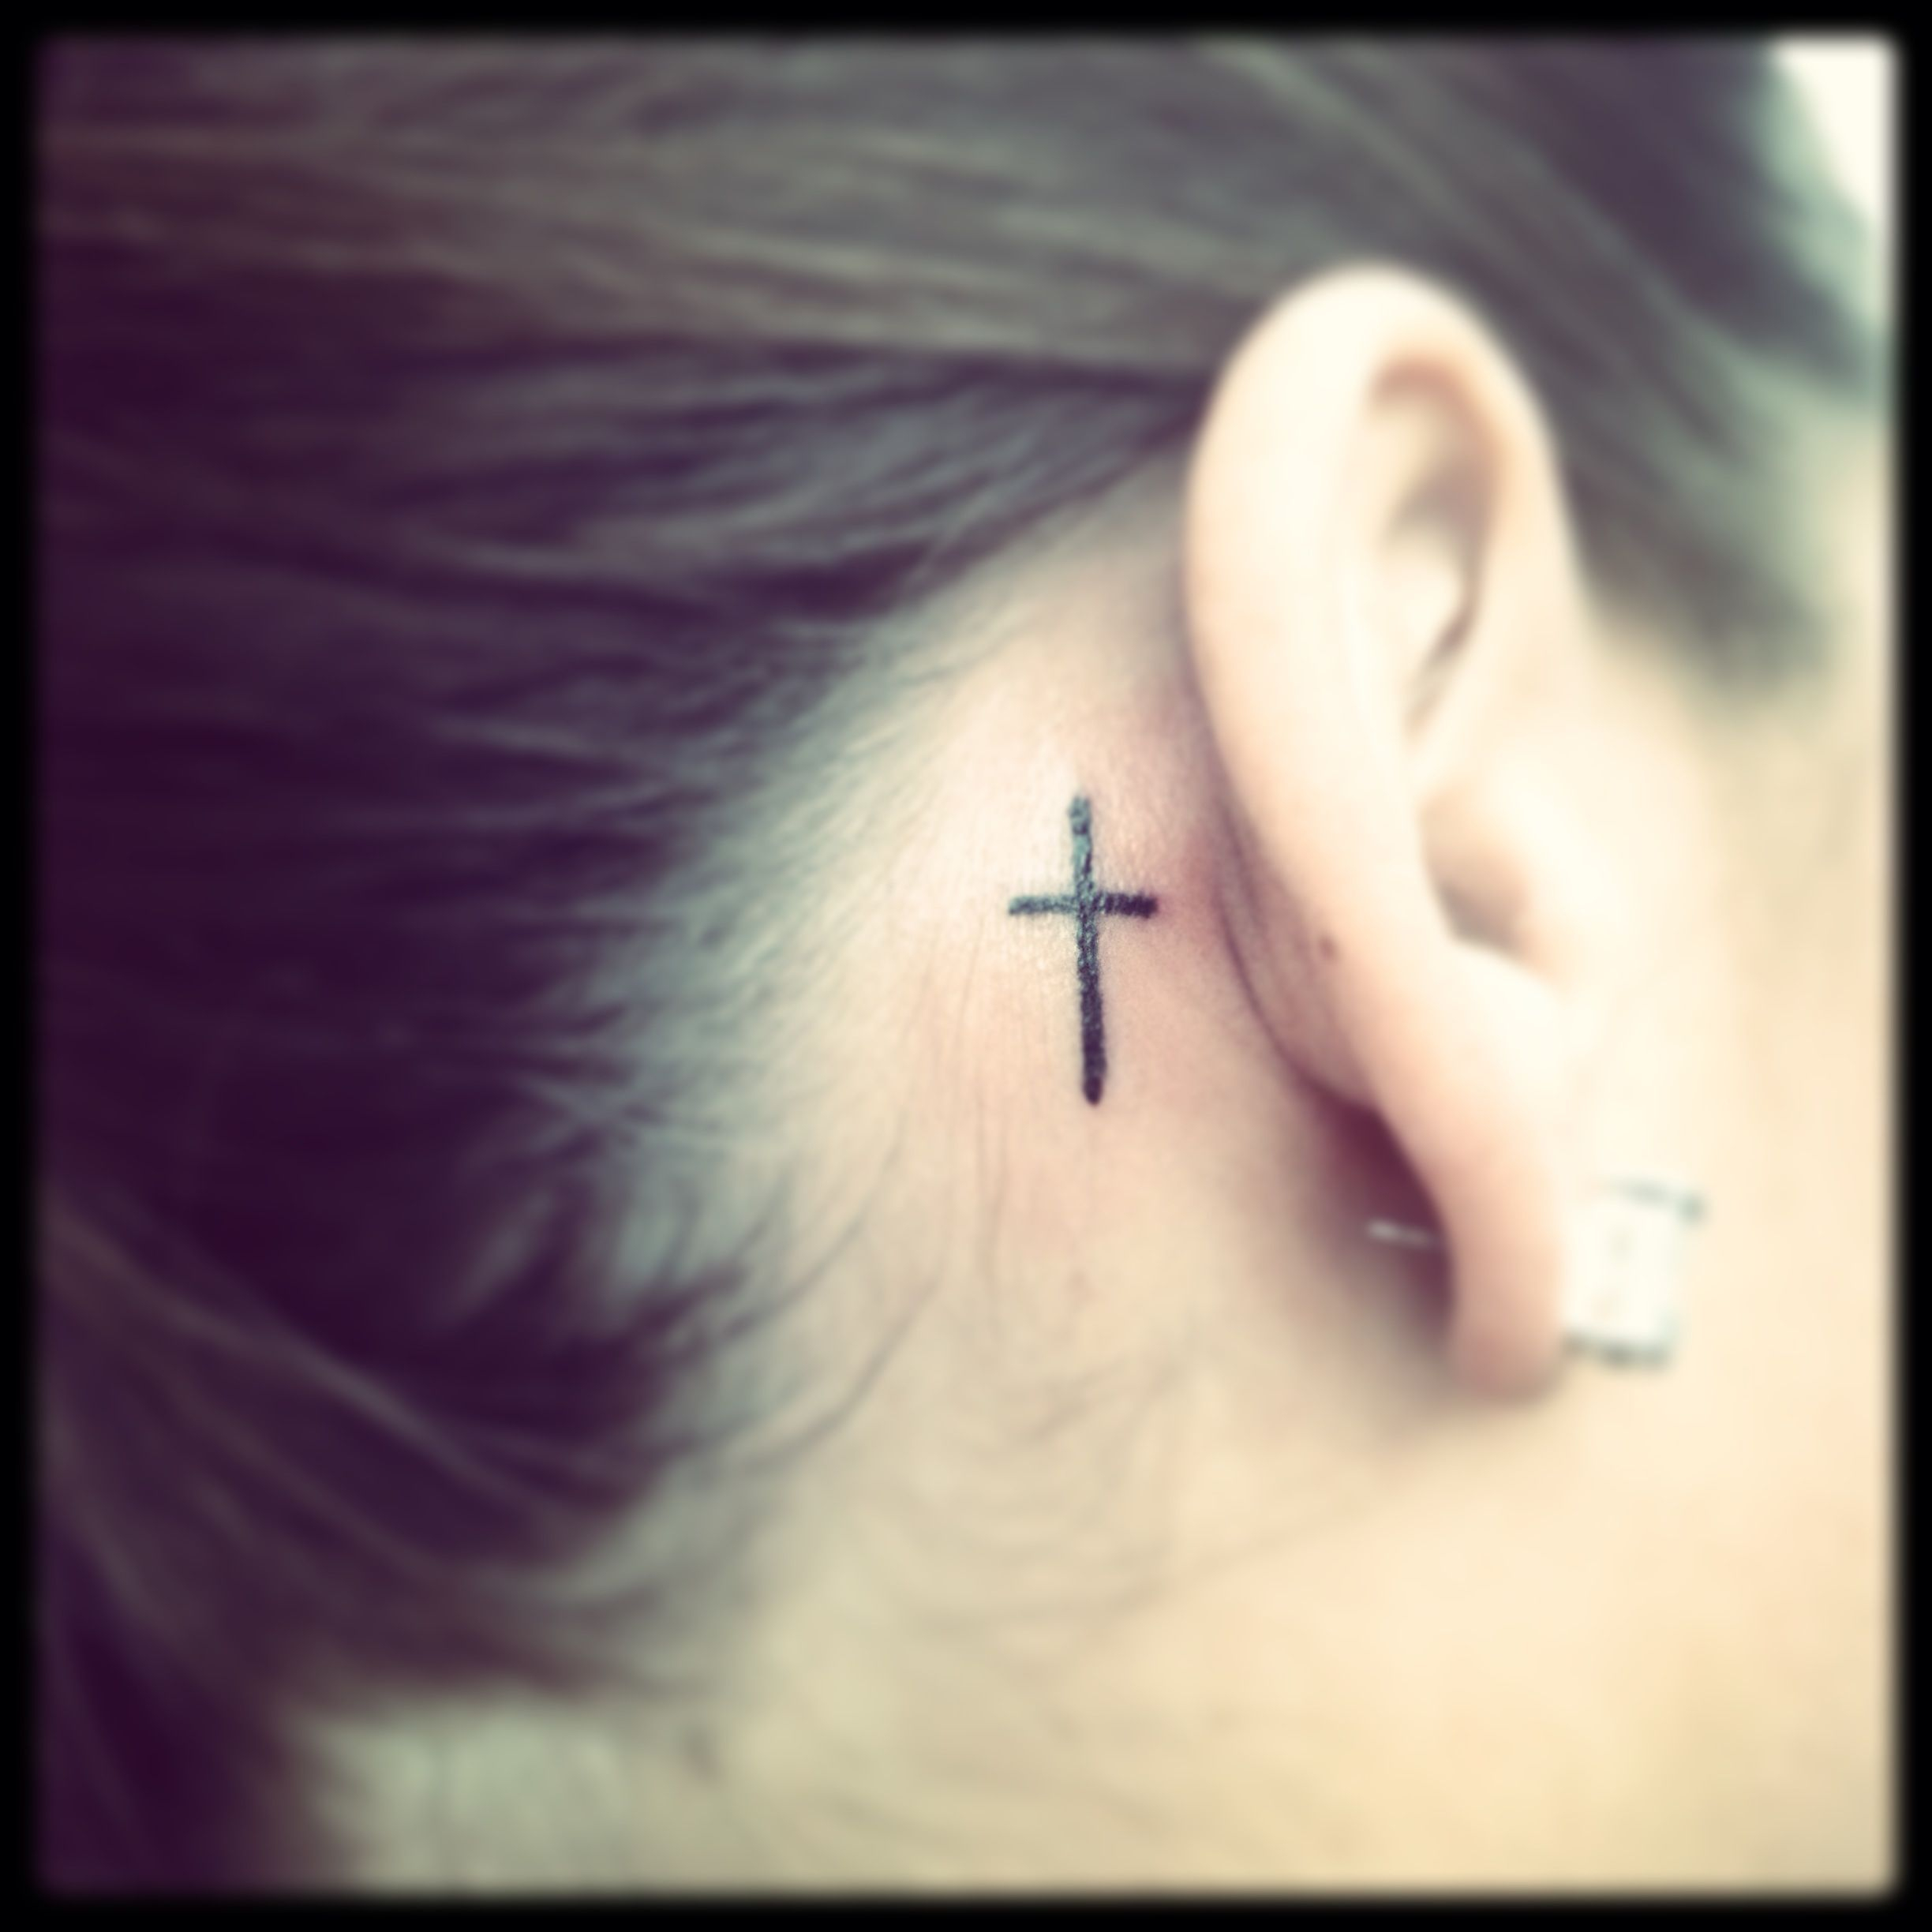 Cross Tattoo Behind Ear Matching One With The Best Friend intended for size 2448 X 2448